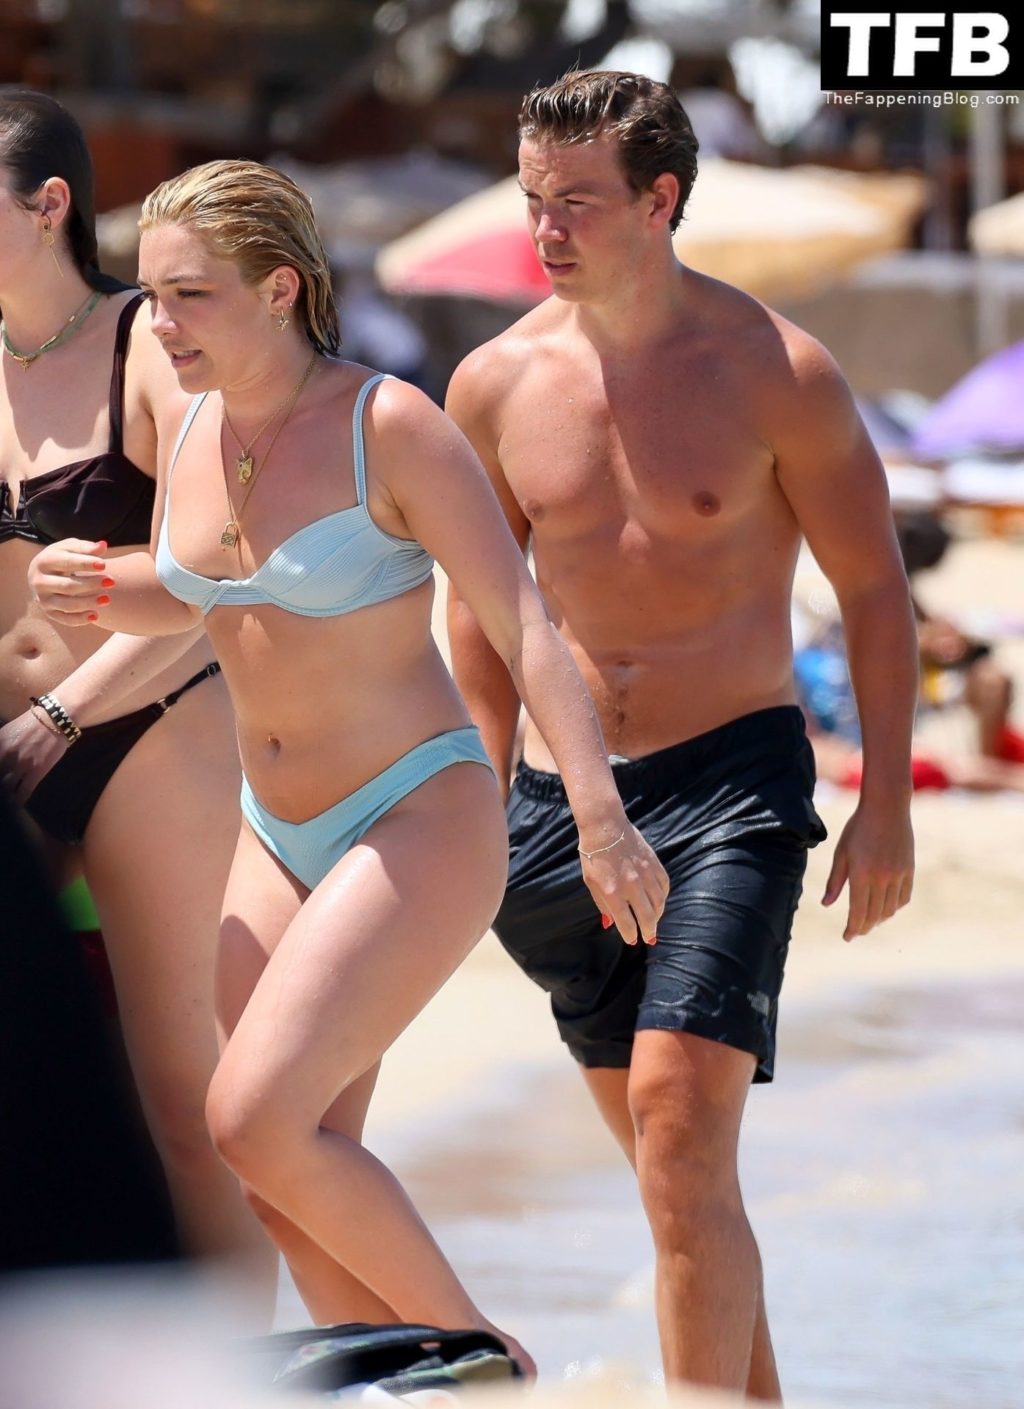 Florence Pugh Sexy The Fappening Blog 6 1024x1409 - Florence Pugh & Will Poulter Enjoy a Flirty Beach Day in Ibiza (14 Photos)